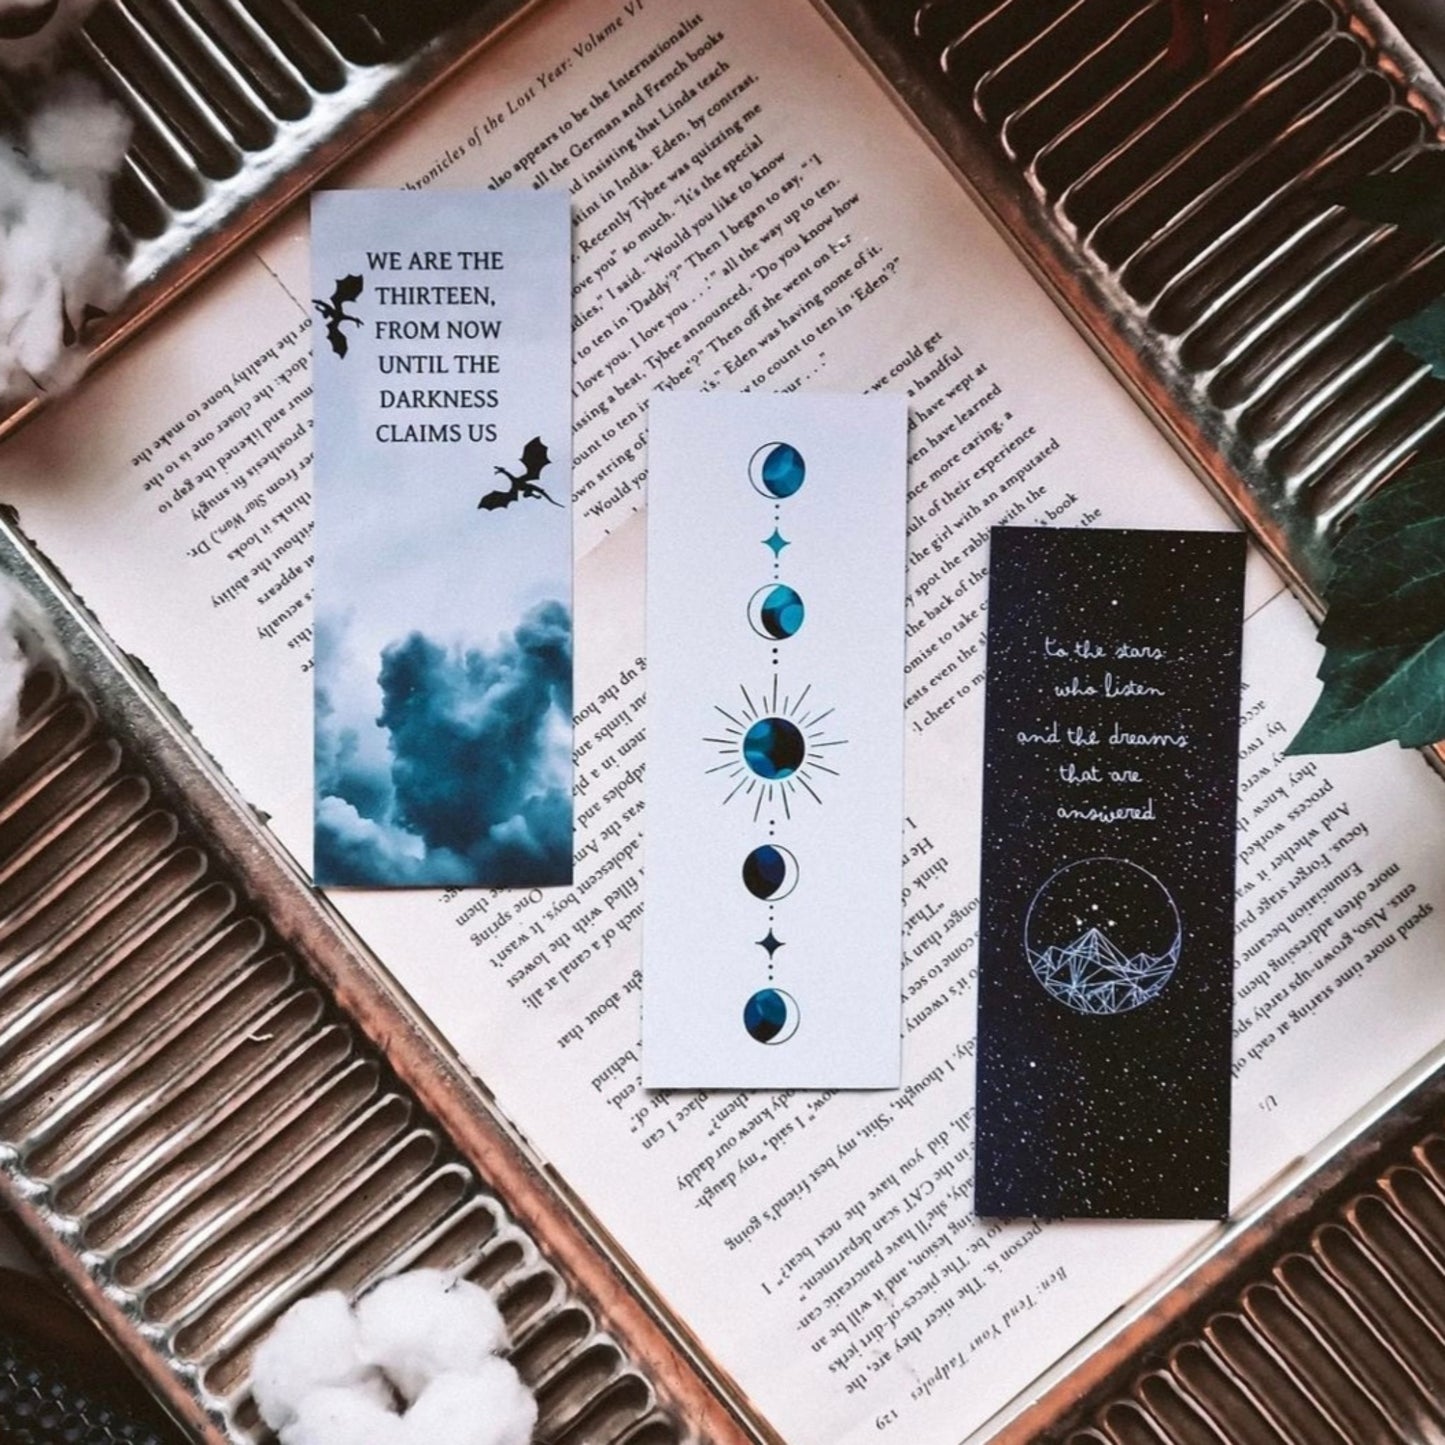 ACOTAR Feyre's tattoo bookmark officially licensed by Sarah J. Maas